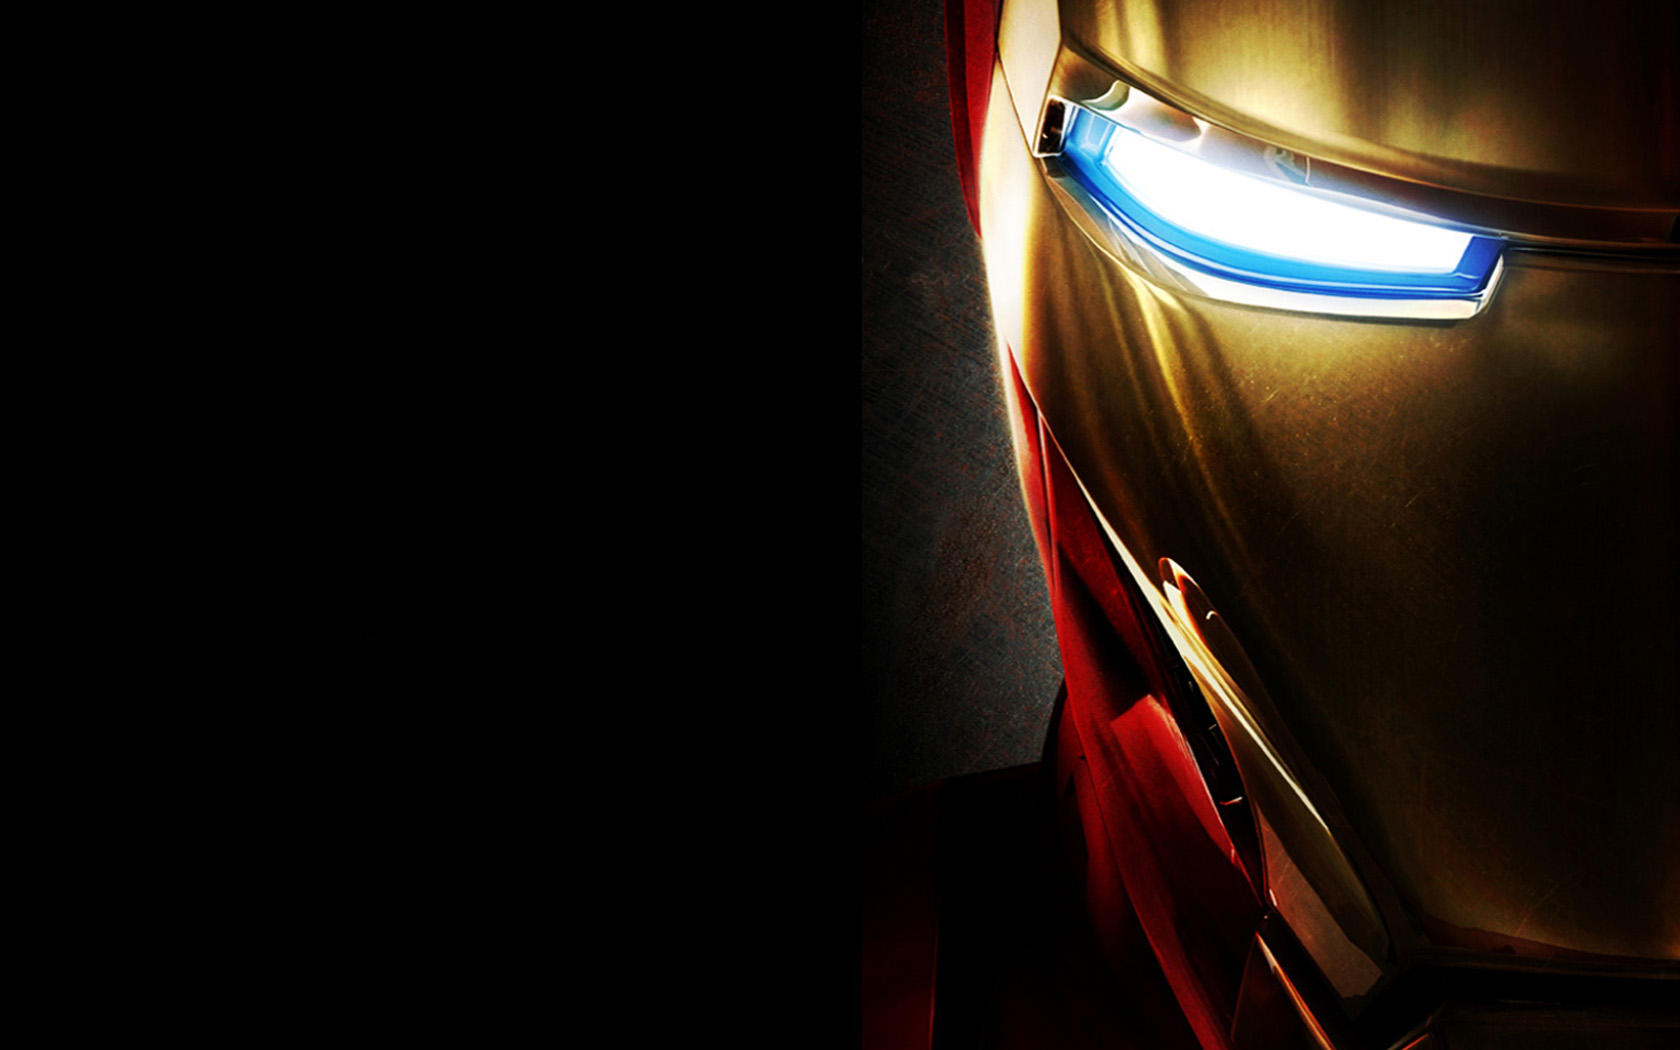 Hope You Like This Ironman HD Wallpaper As Much We Do